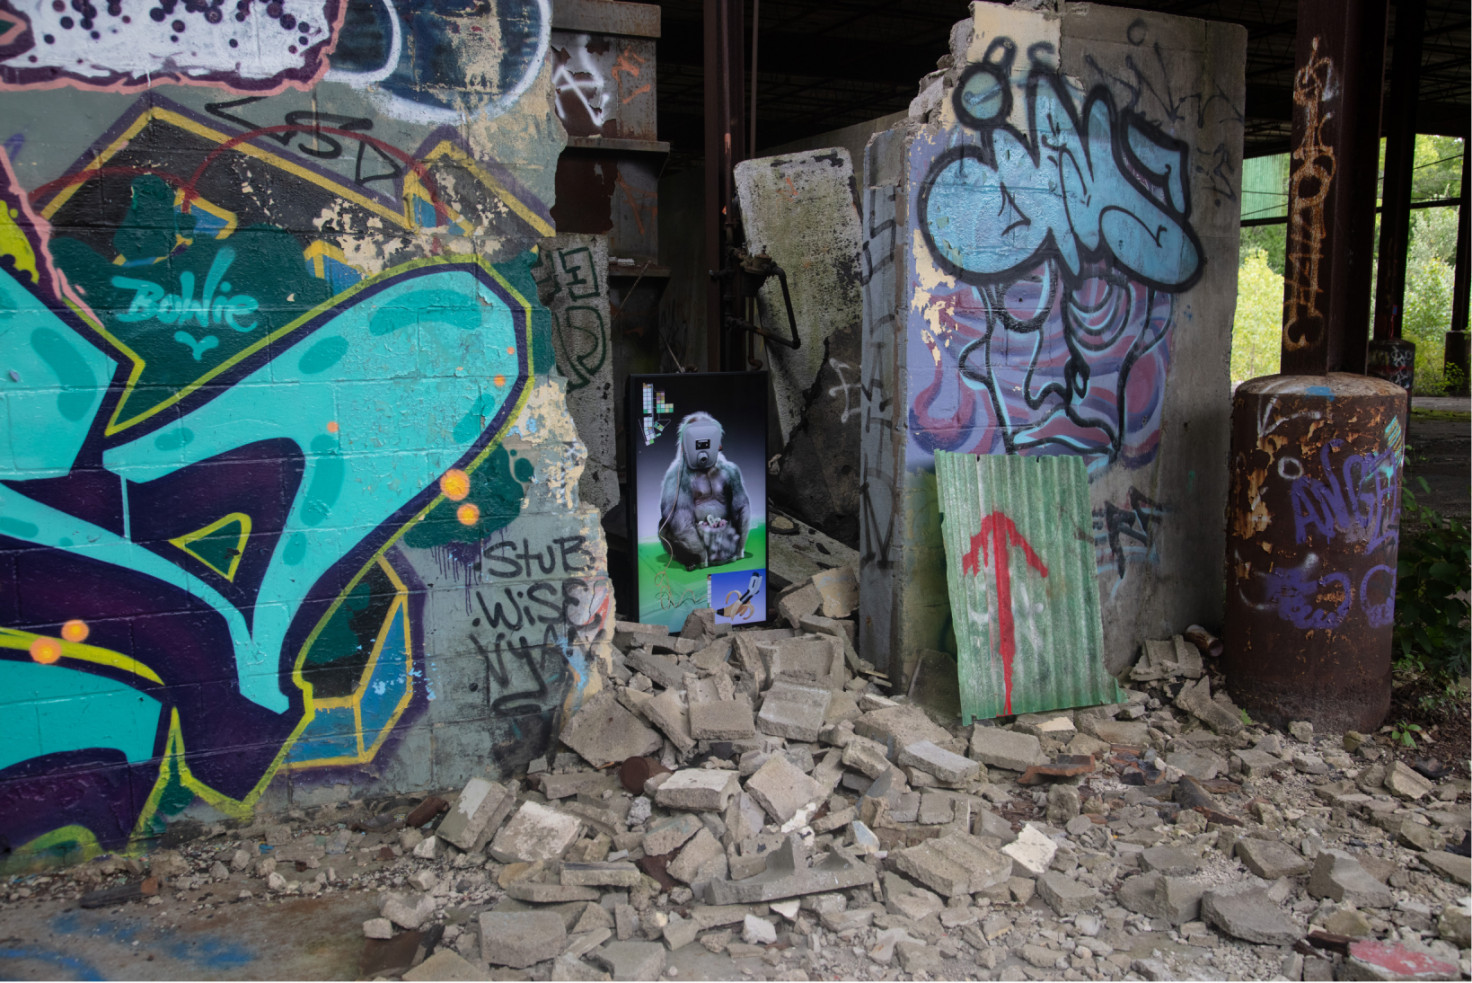 A screen showing an animated gorilla rests in the rubble of a graffiti-covered ruin